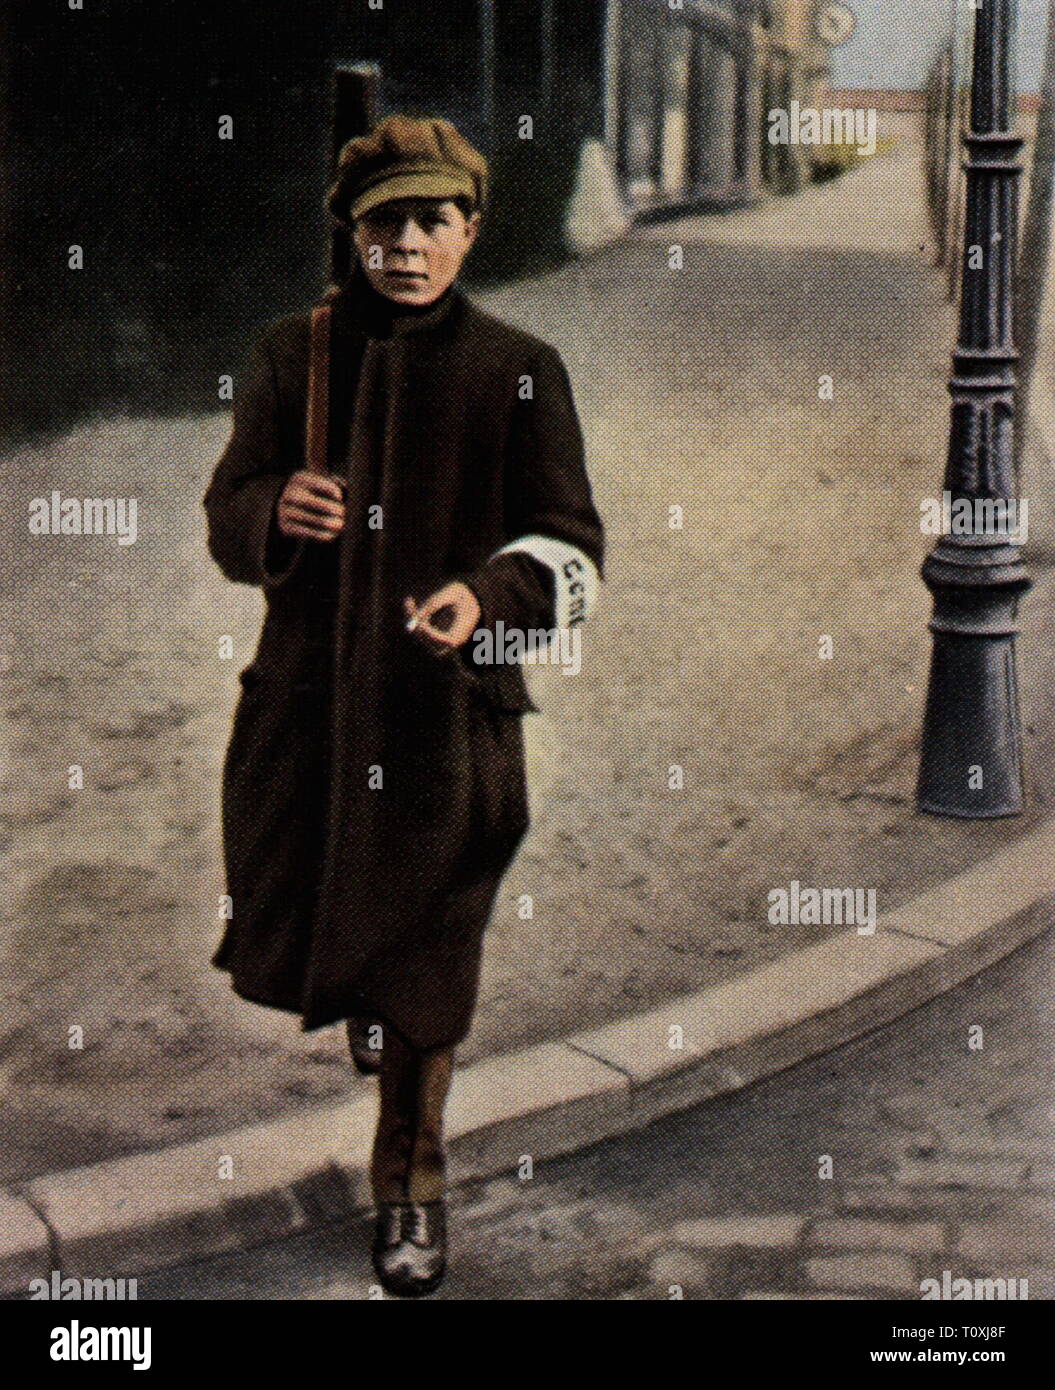 Ruhr Uprising 1920, sentry of the Red Ruhr Army, March 1920, coloured photograph, cigarette card, series 'Die Nachkriegszeit', 1935, March uprising, Ruhr conflict, Red Army, communist, communists, Ruhr area, Ruhr Valley, Free State of Prussia, Rhine Province, people, Germany, German Reich, Third Reich, Weimar Republic, 1920s, 20th century, guard duty, watch duty, coloured, colored, post war period, post-war period, post-war years, post-war era, historic, historical, Additional-Rights-Clearance-Info-Not-Available Stock Photo